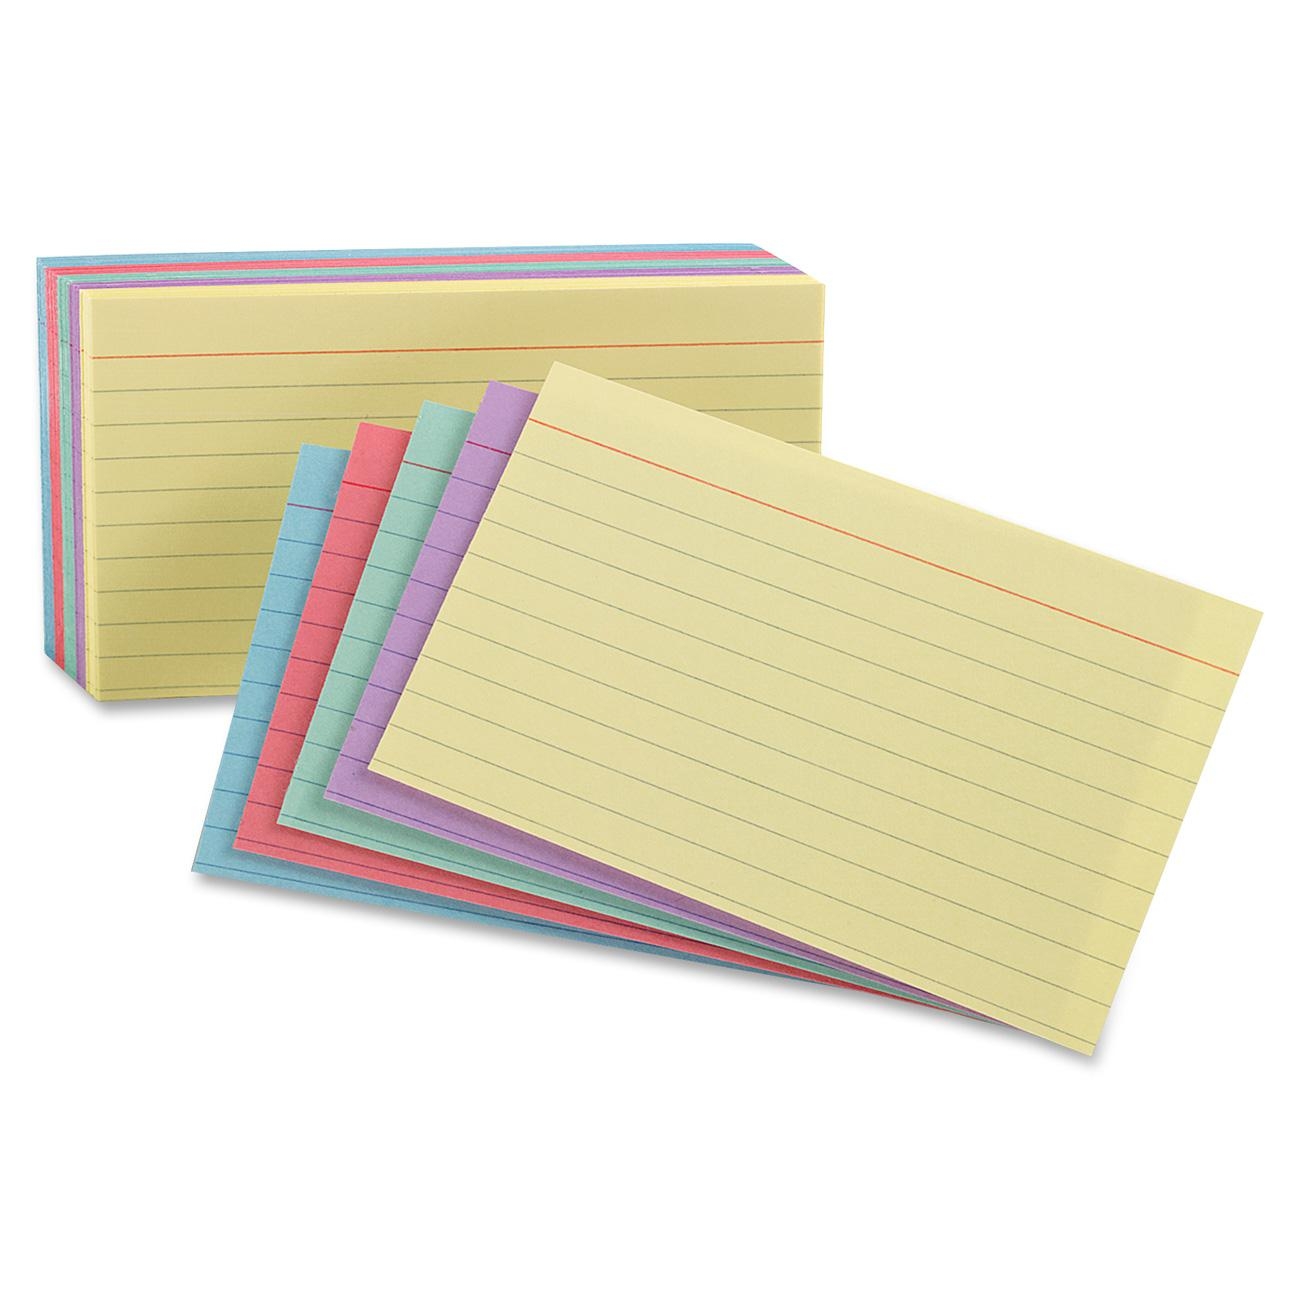 Colorful Index Cards